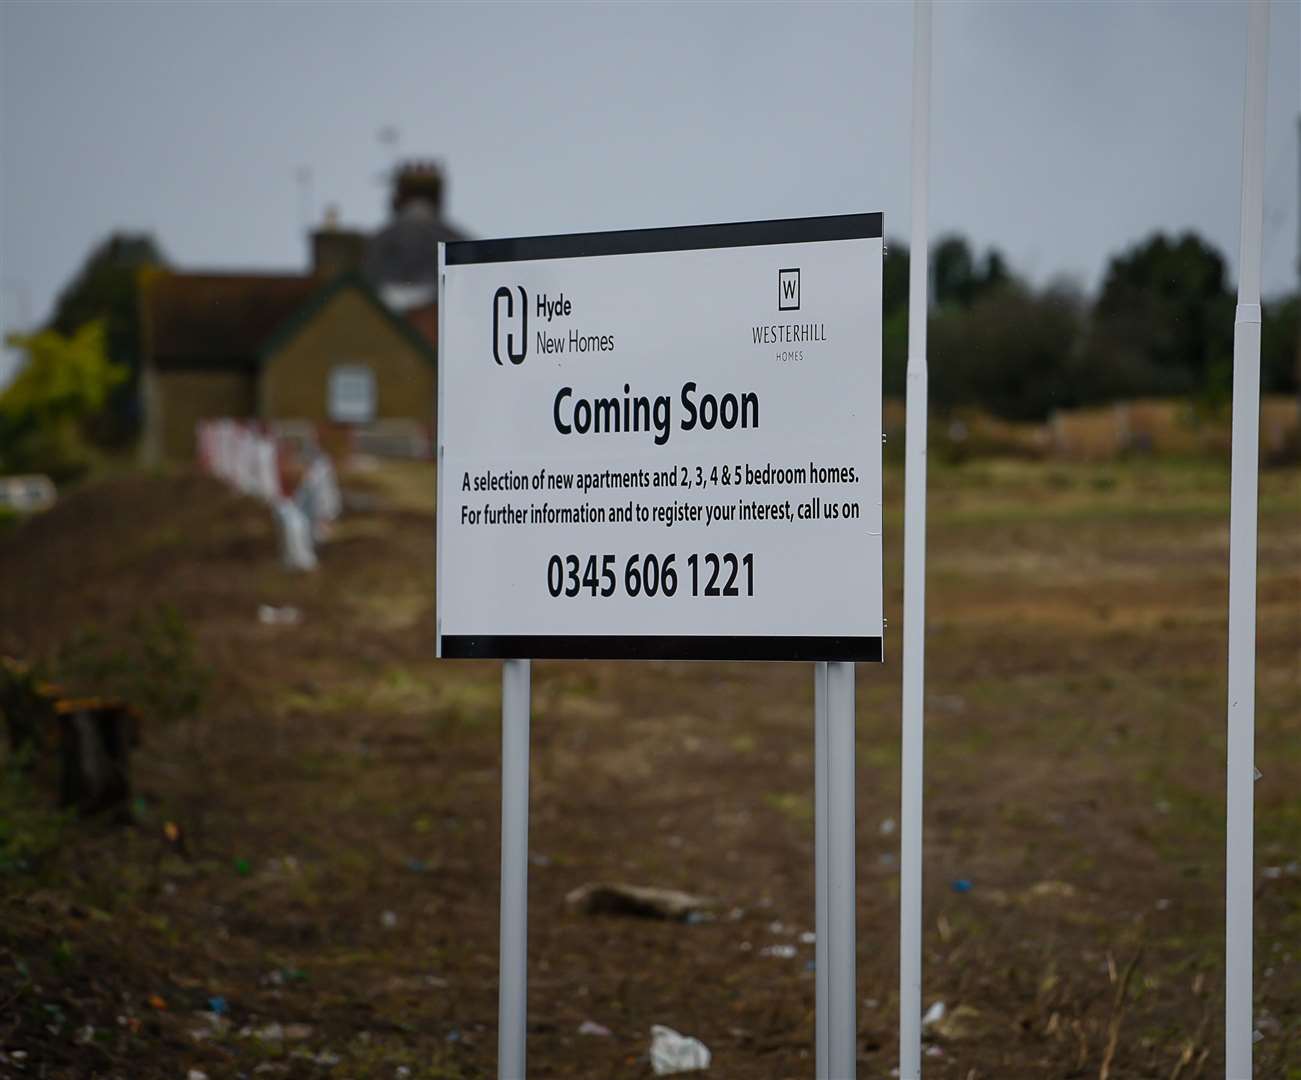 The homes are set to be built on Stones Farm, Bapchild Picture: Alan Langley